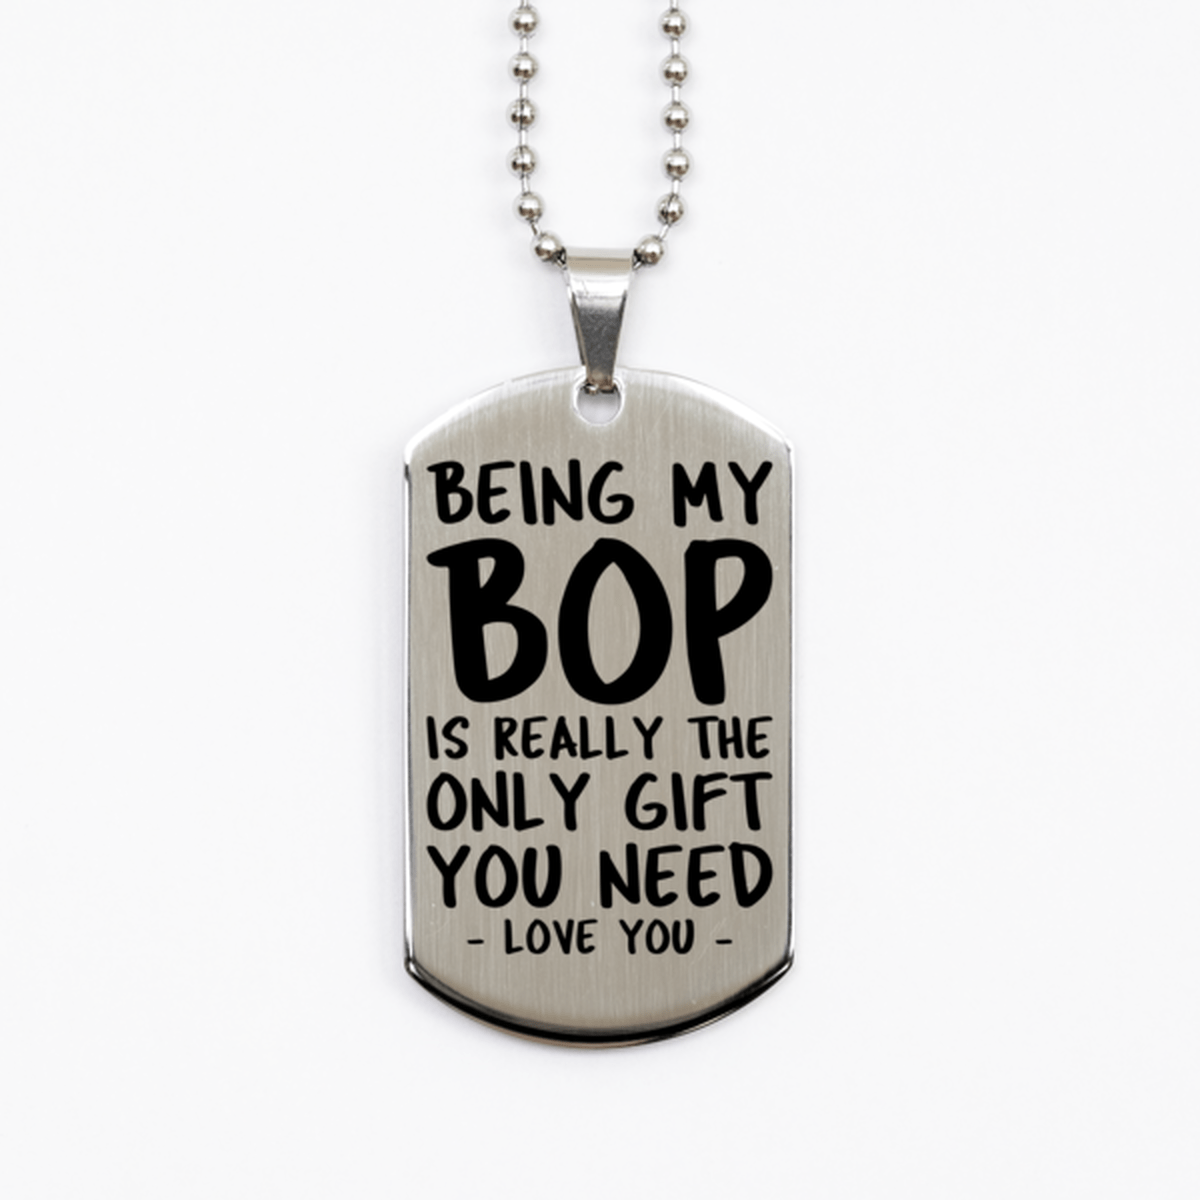 Funny Bop Silver Dog Tag Necklace, Being My Bop Is Really the Only Gift You Need, Best Birthday Gifts for Bop